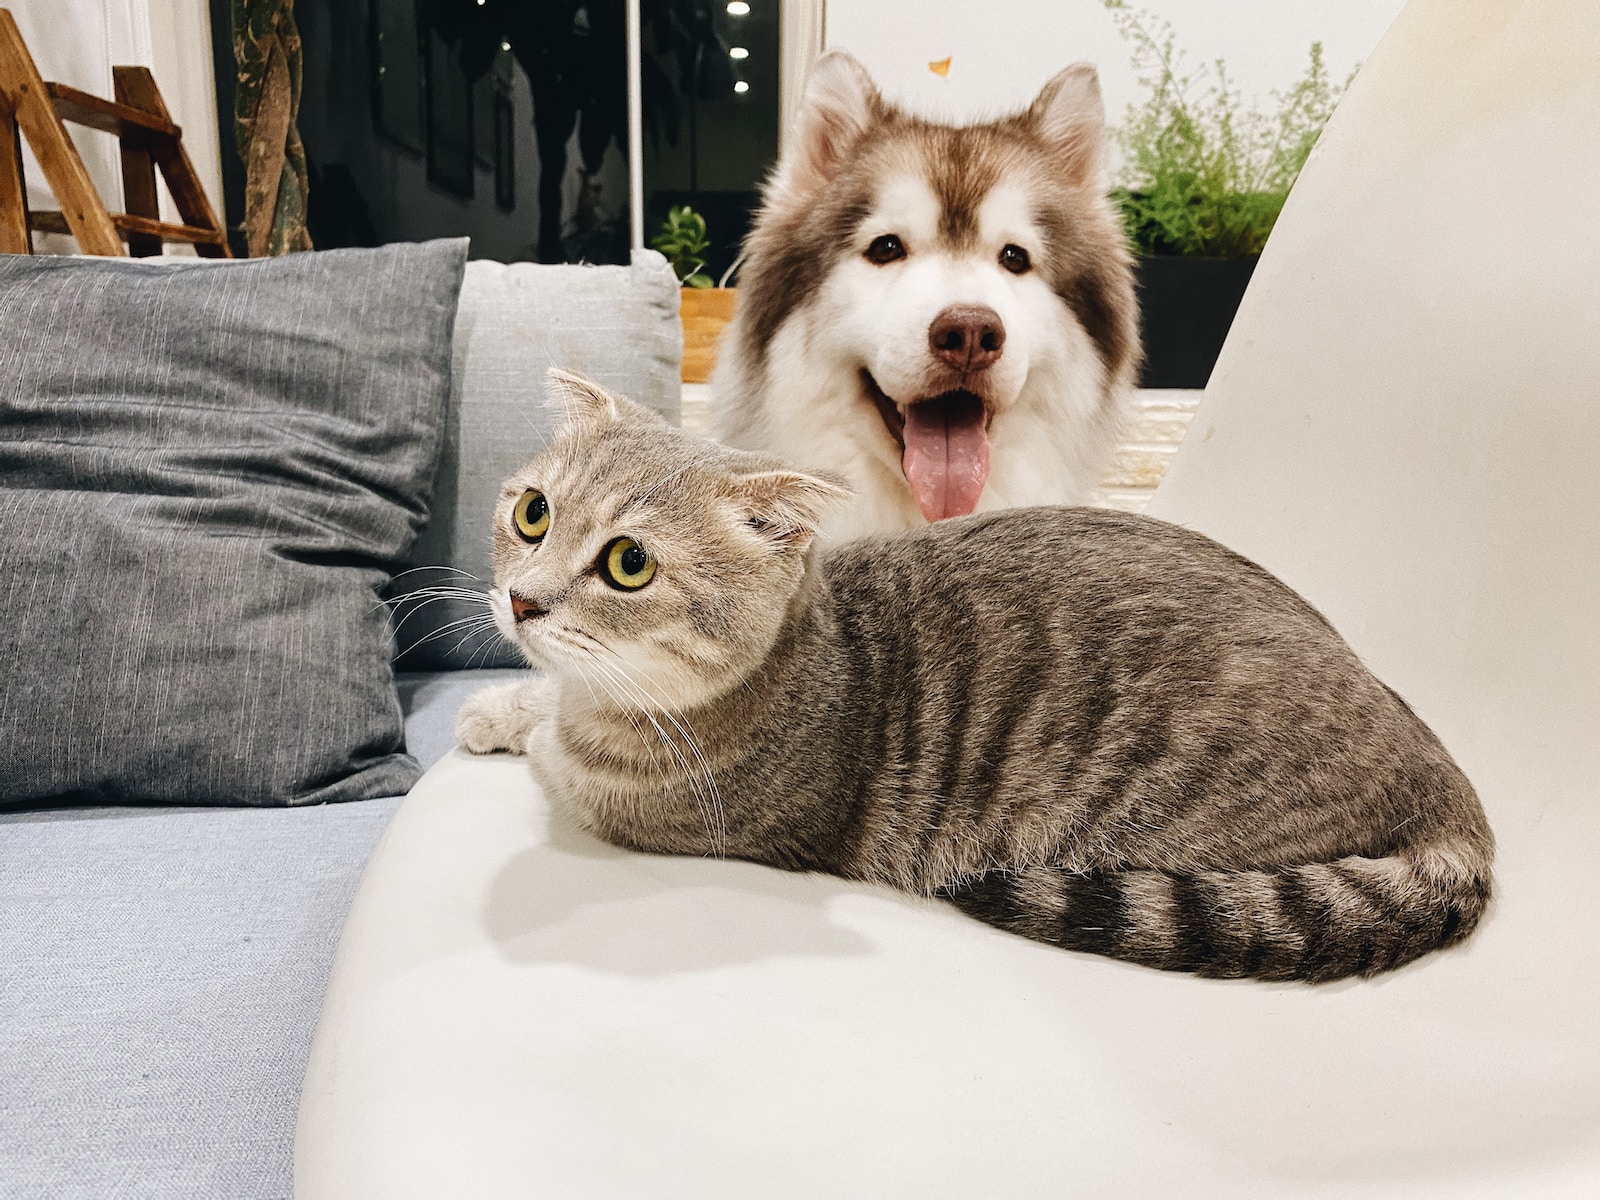 Dog visiting house with cat